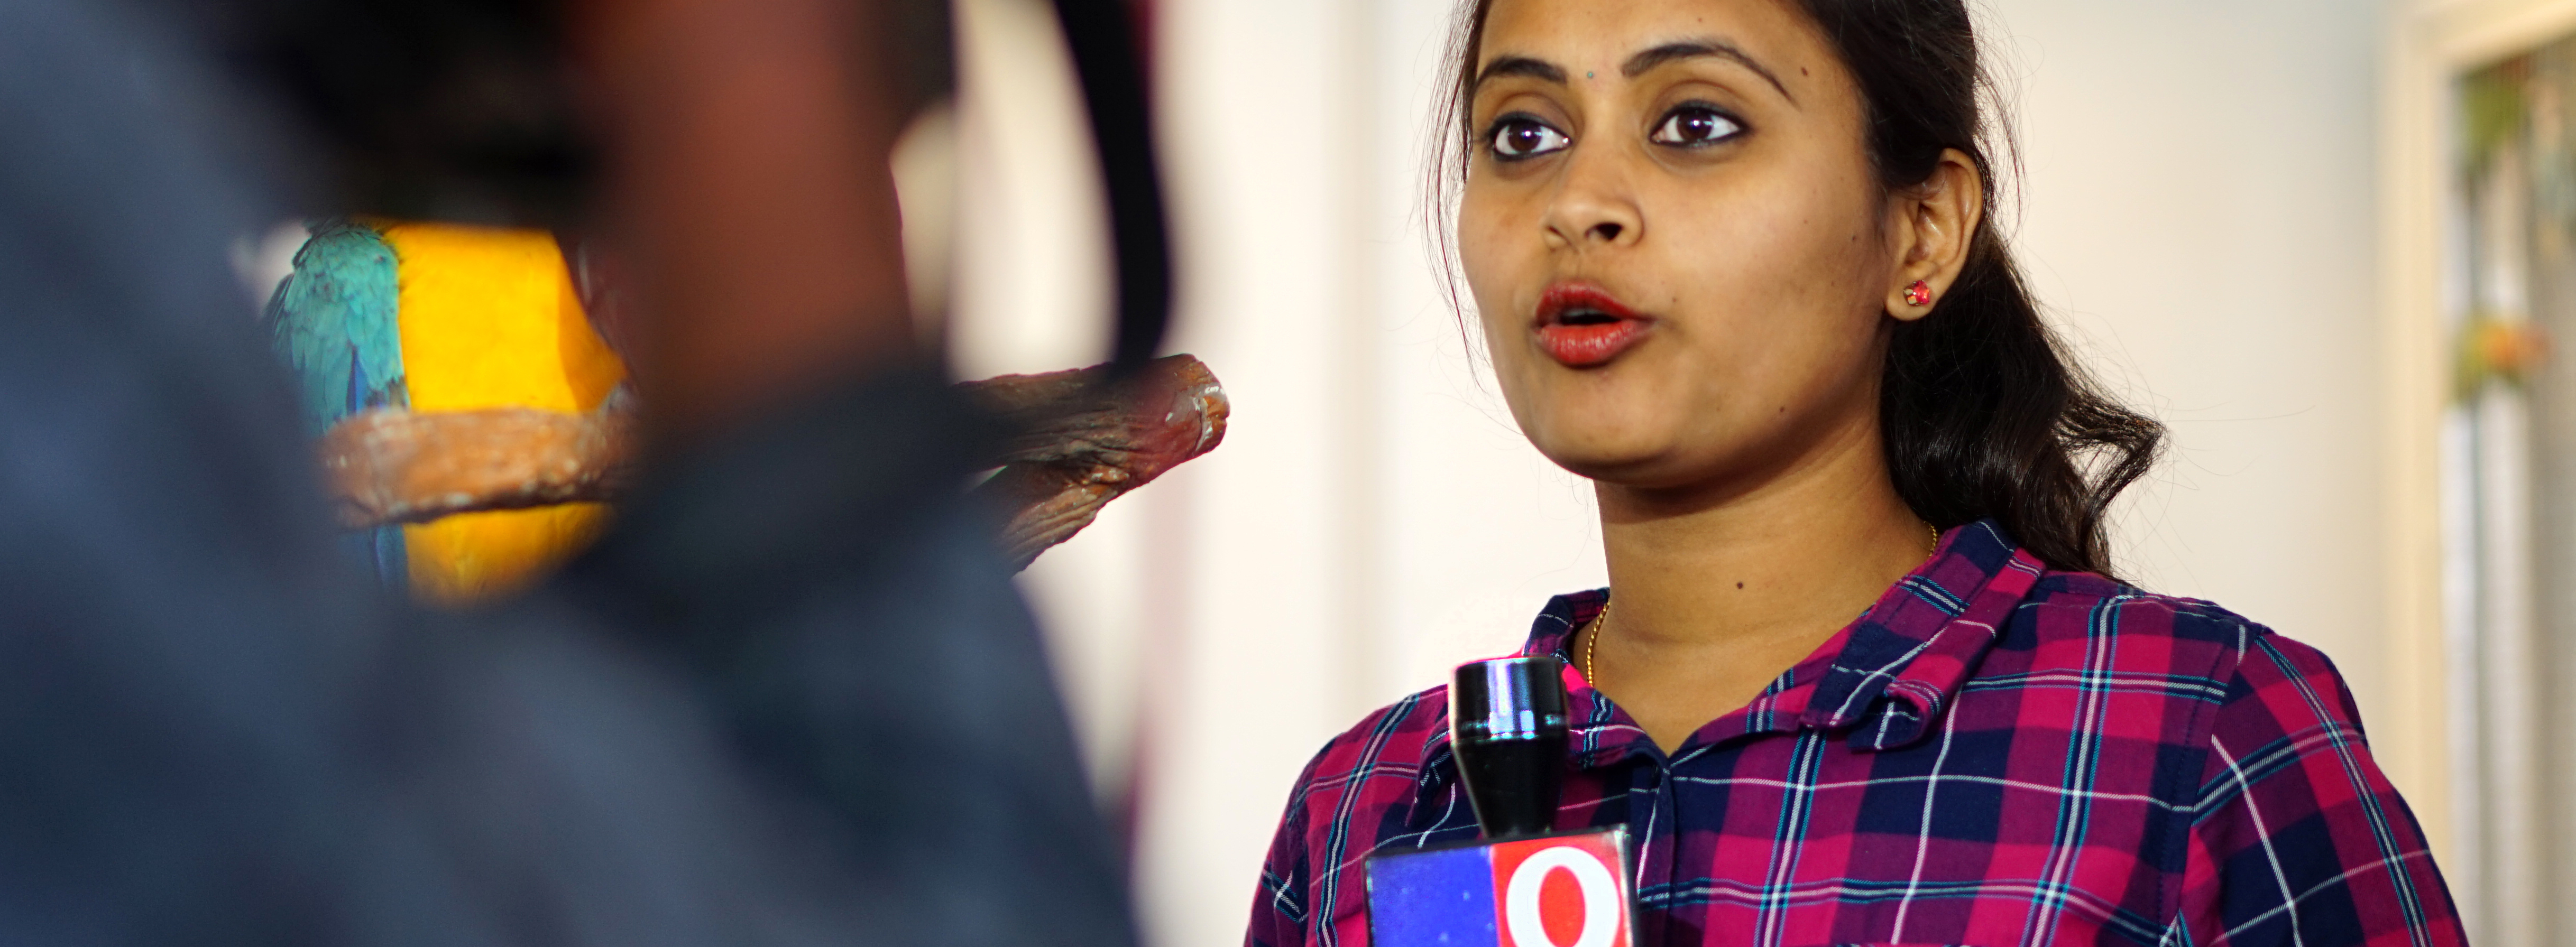 Female TV reporter covering live news in Hyderabad, India. Credit: Reddees / Shutterstock.com